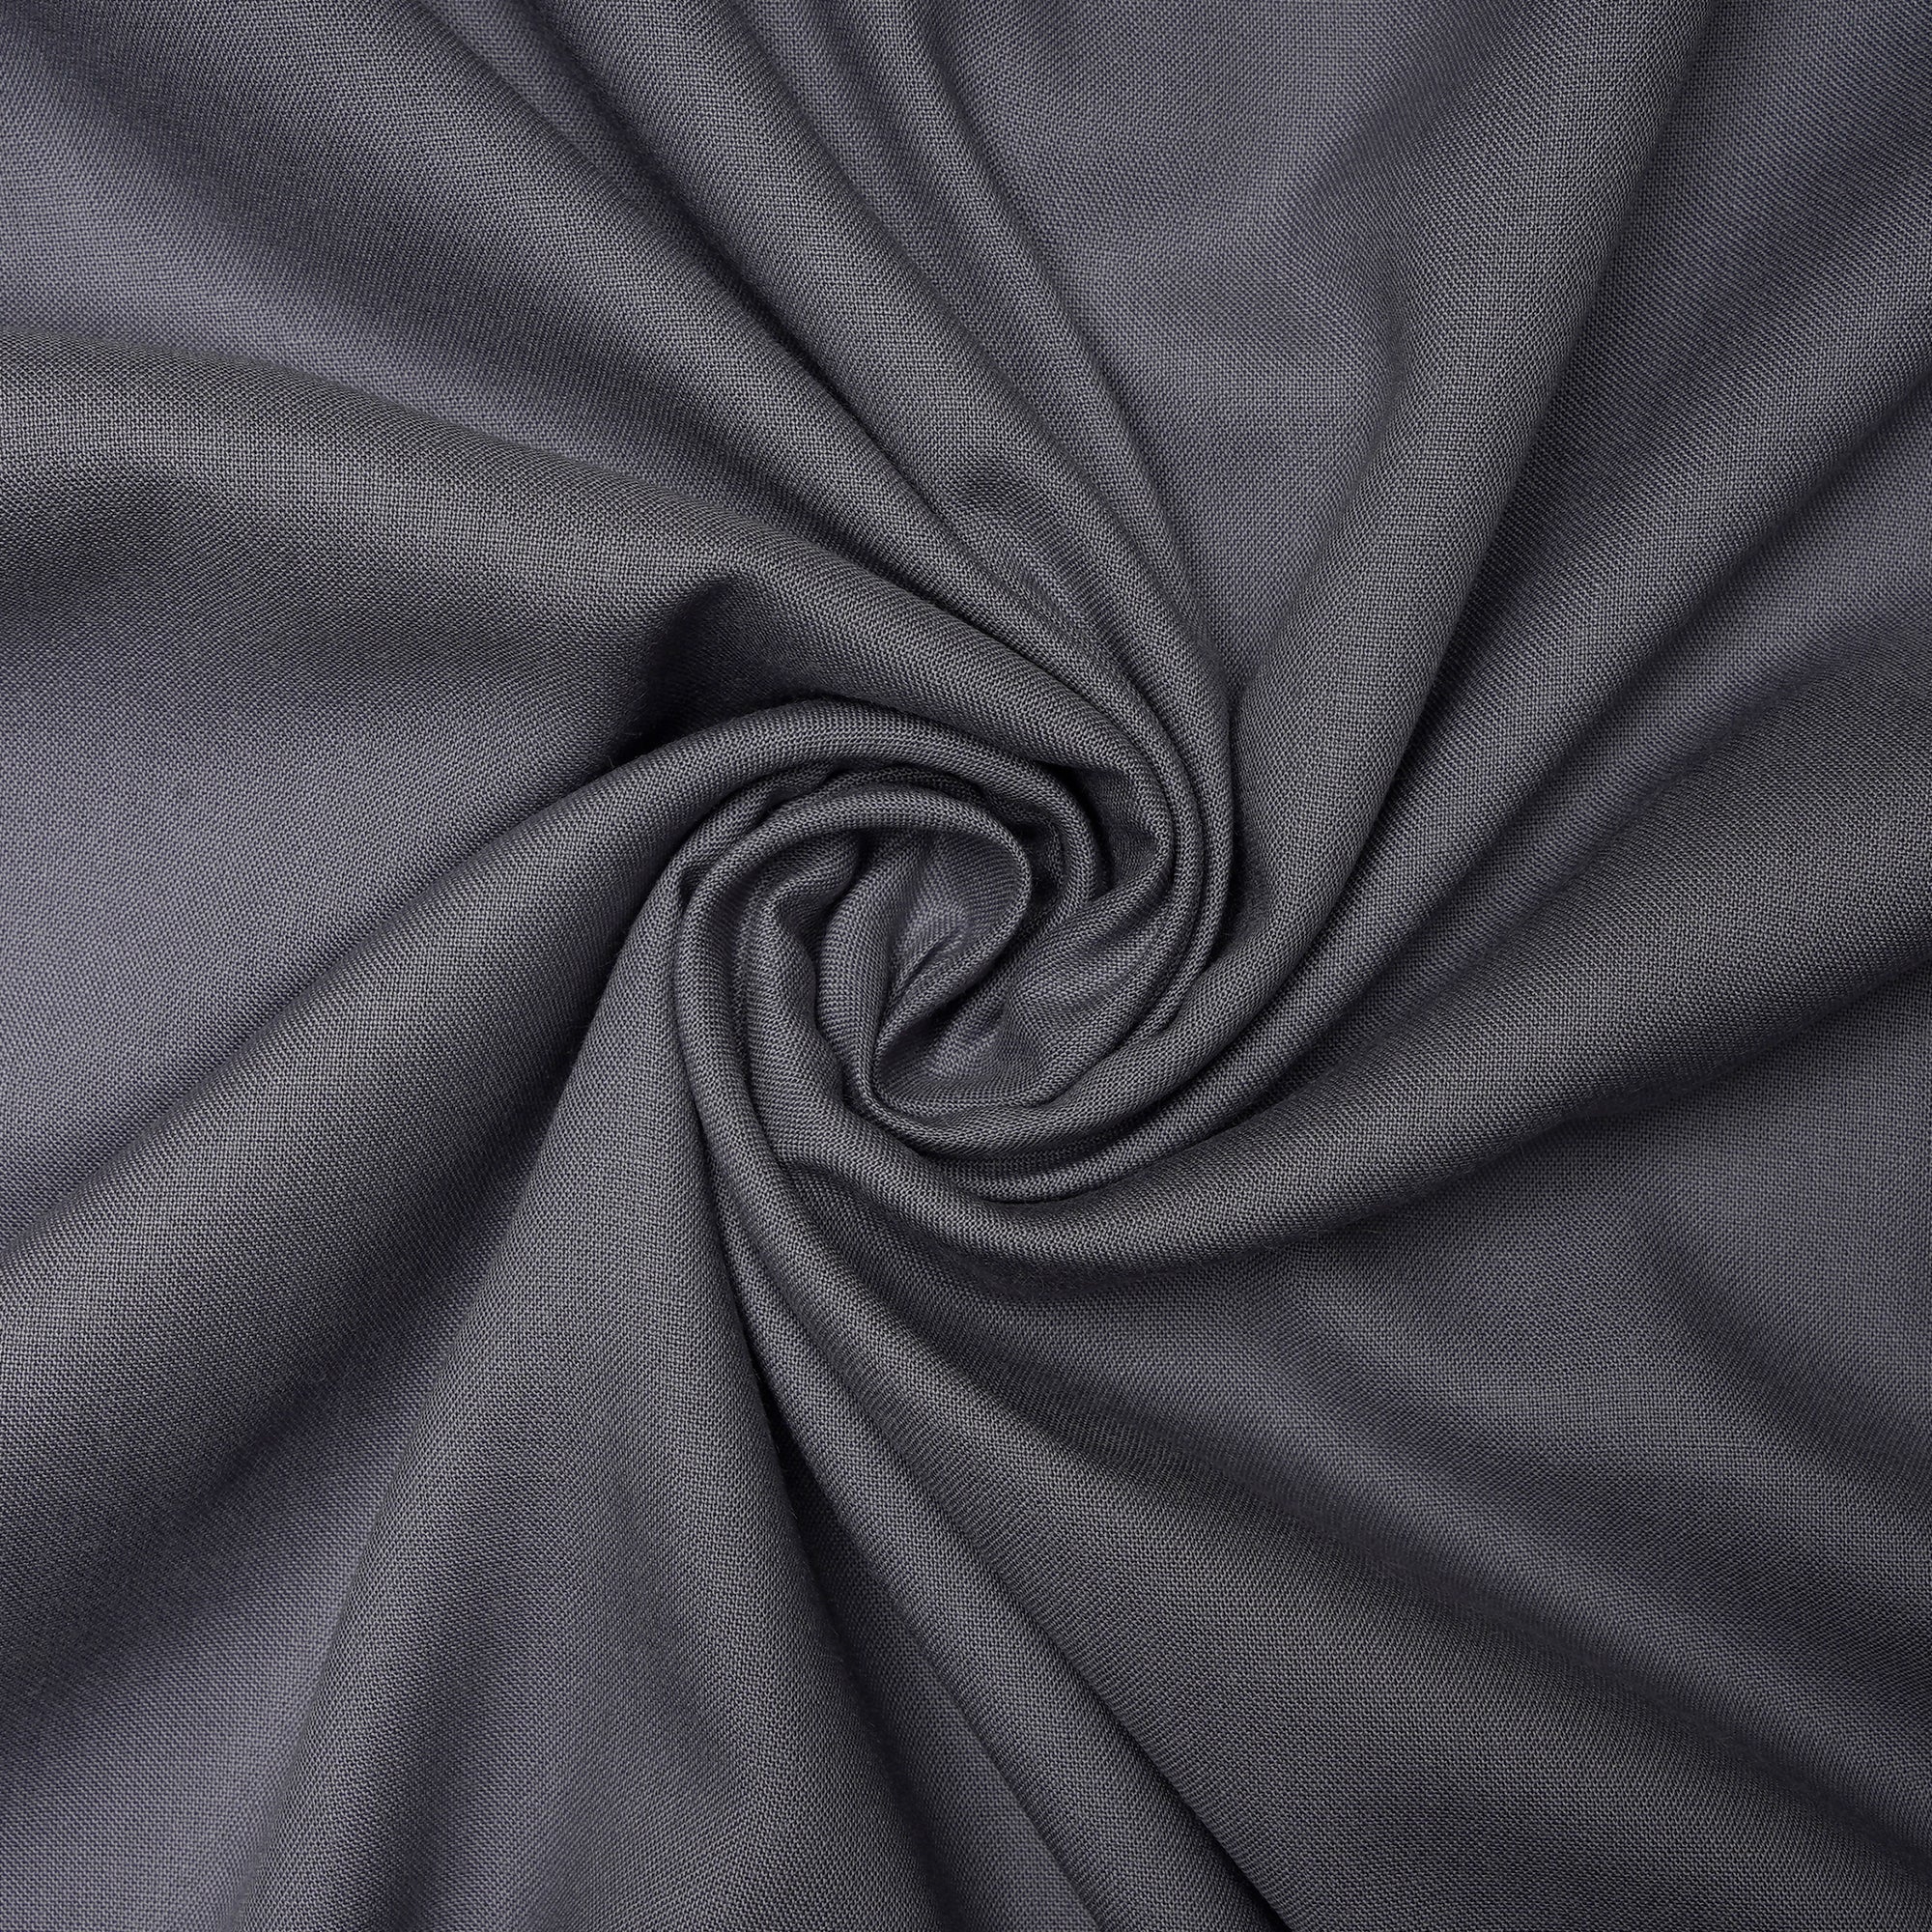 Porpoise Plain Mill Dyed Rayon Fabric